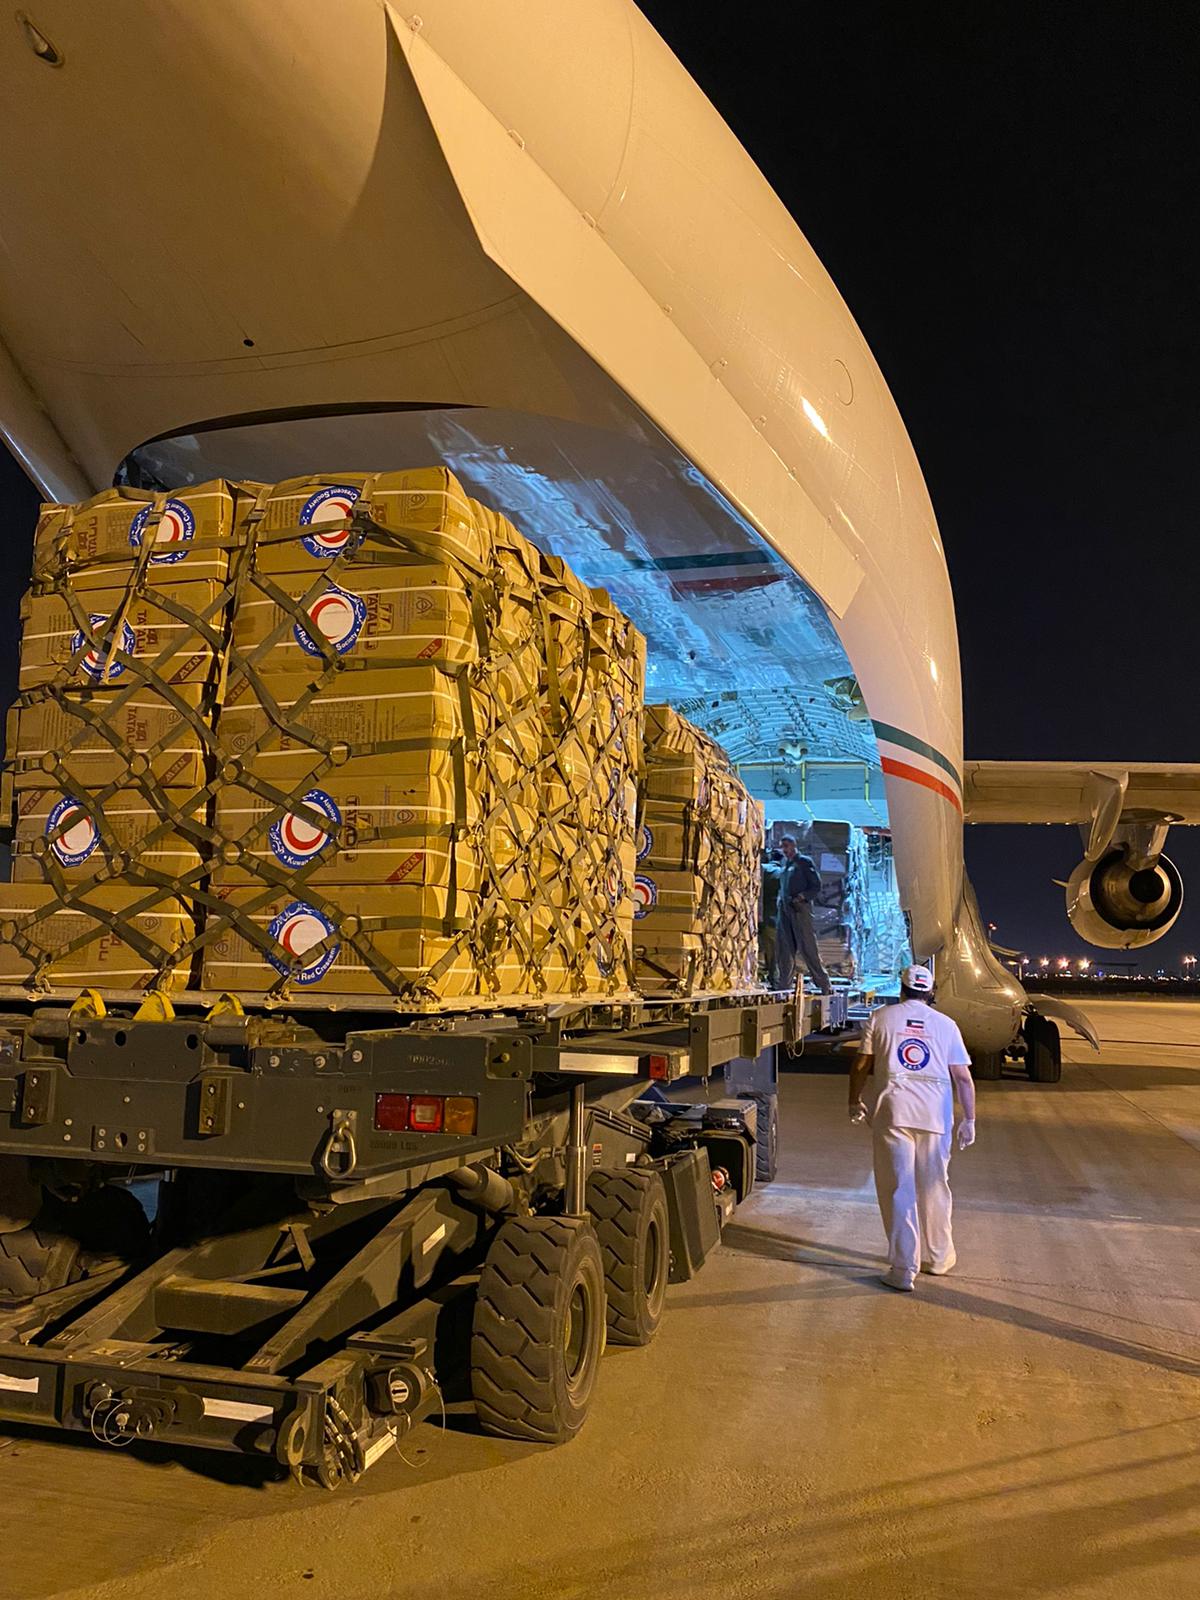 Planeload of medical supplies en route to India from Kuwait